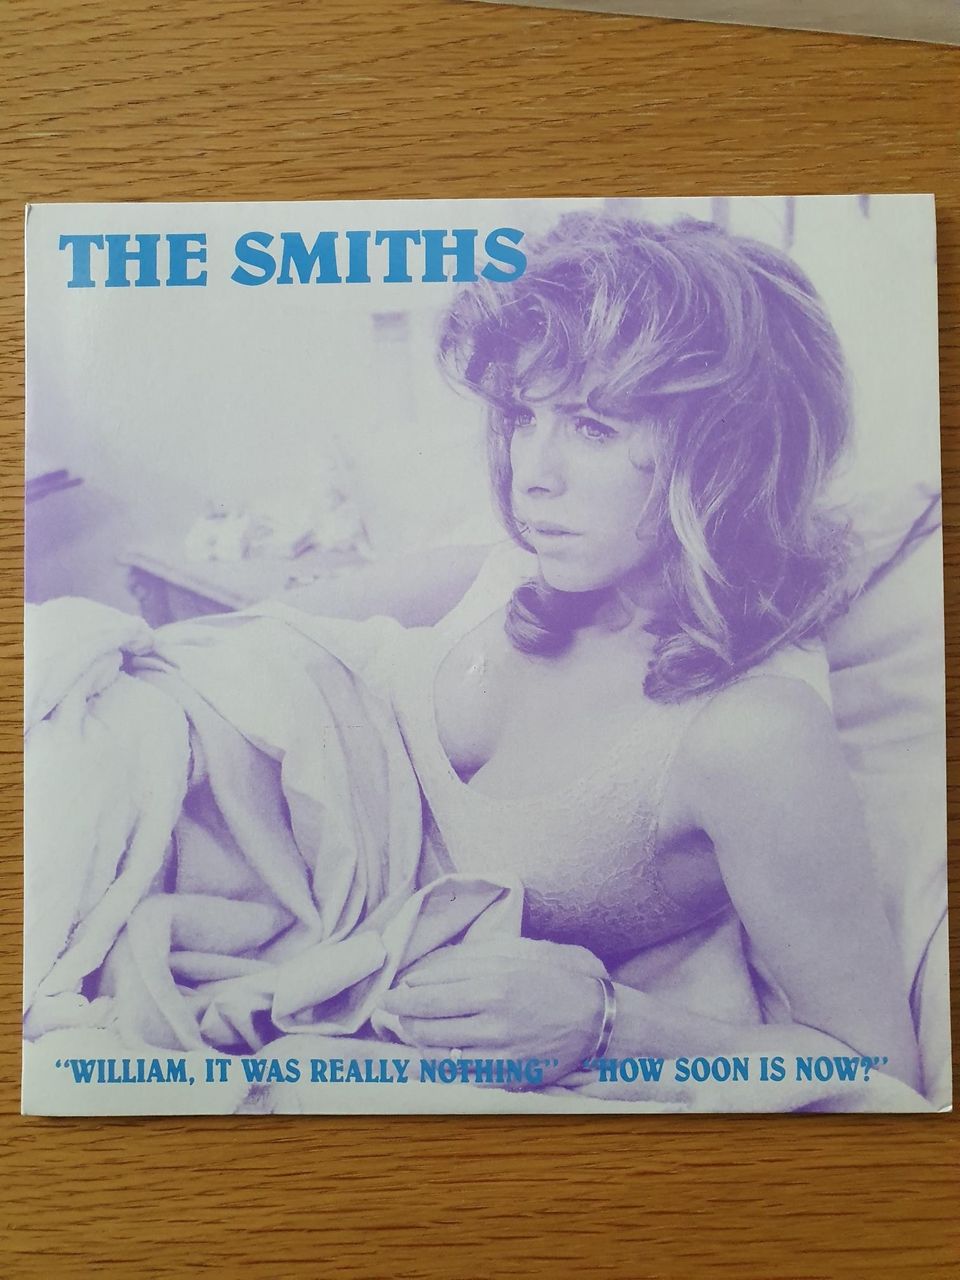 The Smiths, William, it was..., 7"